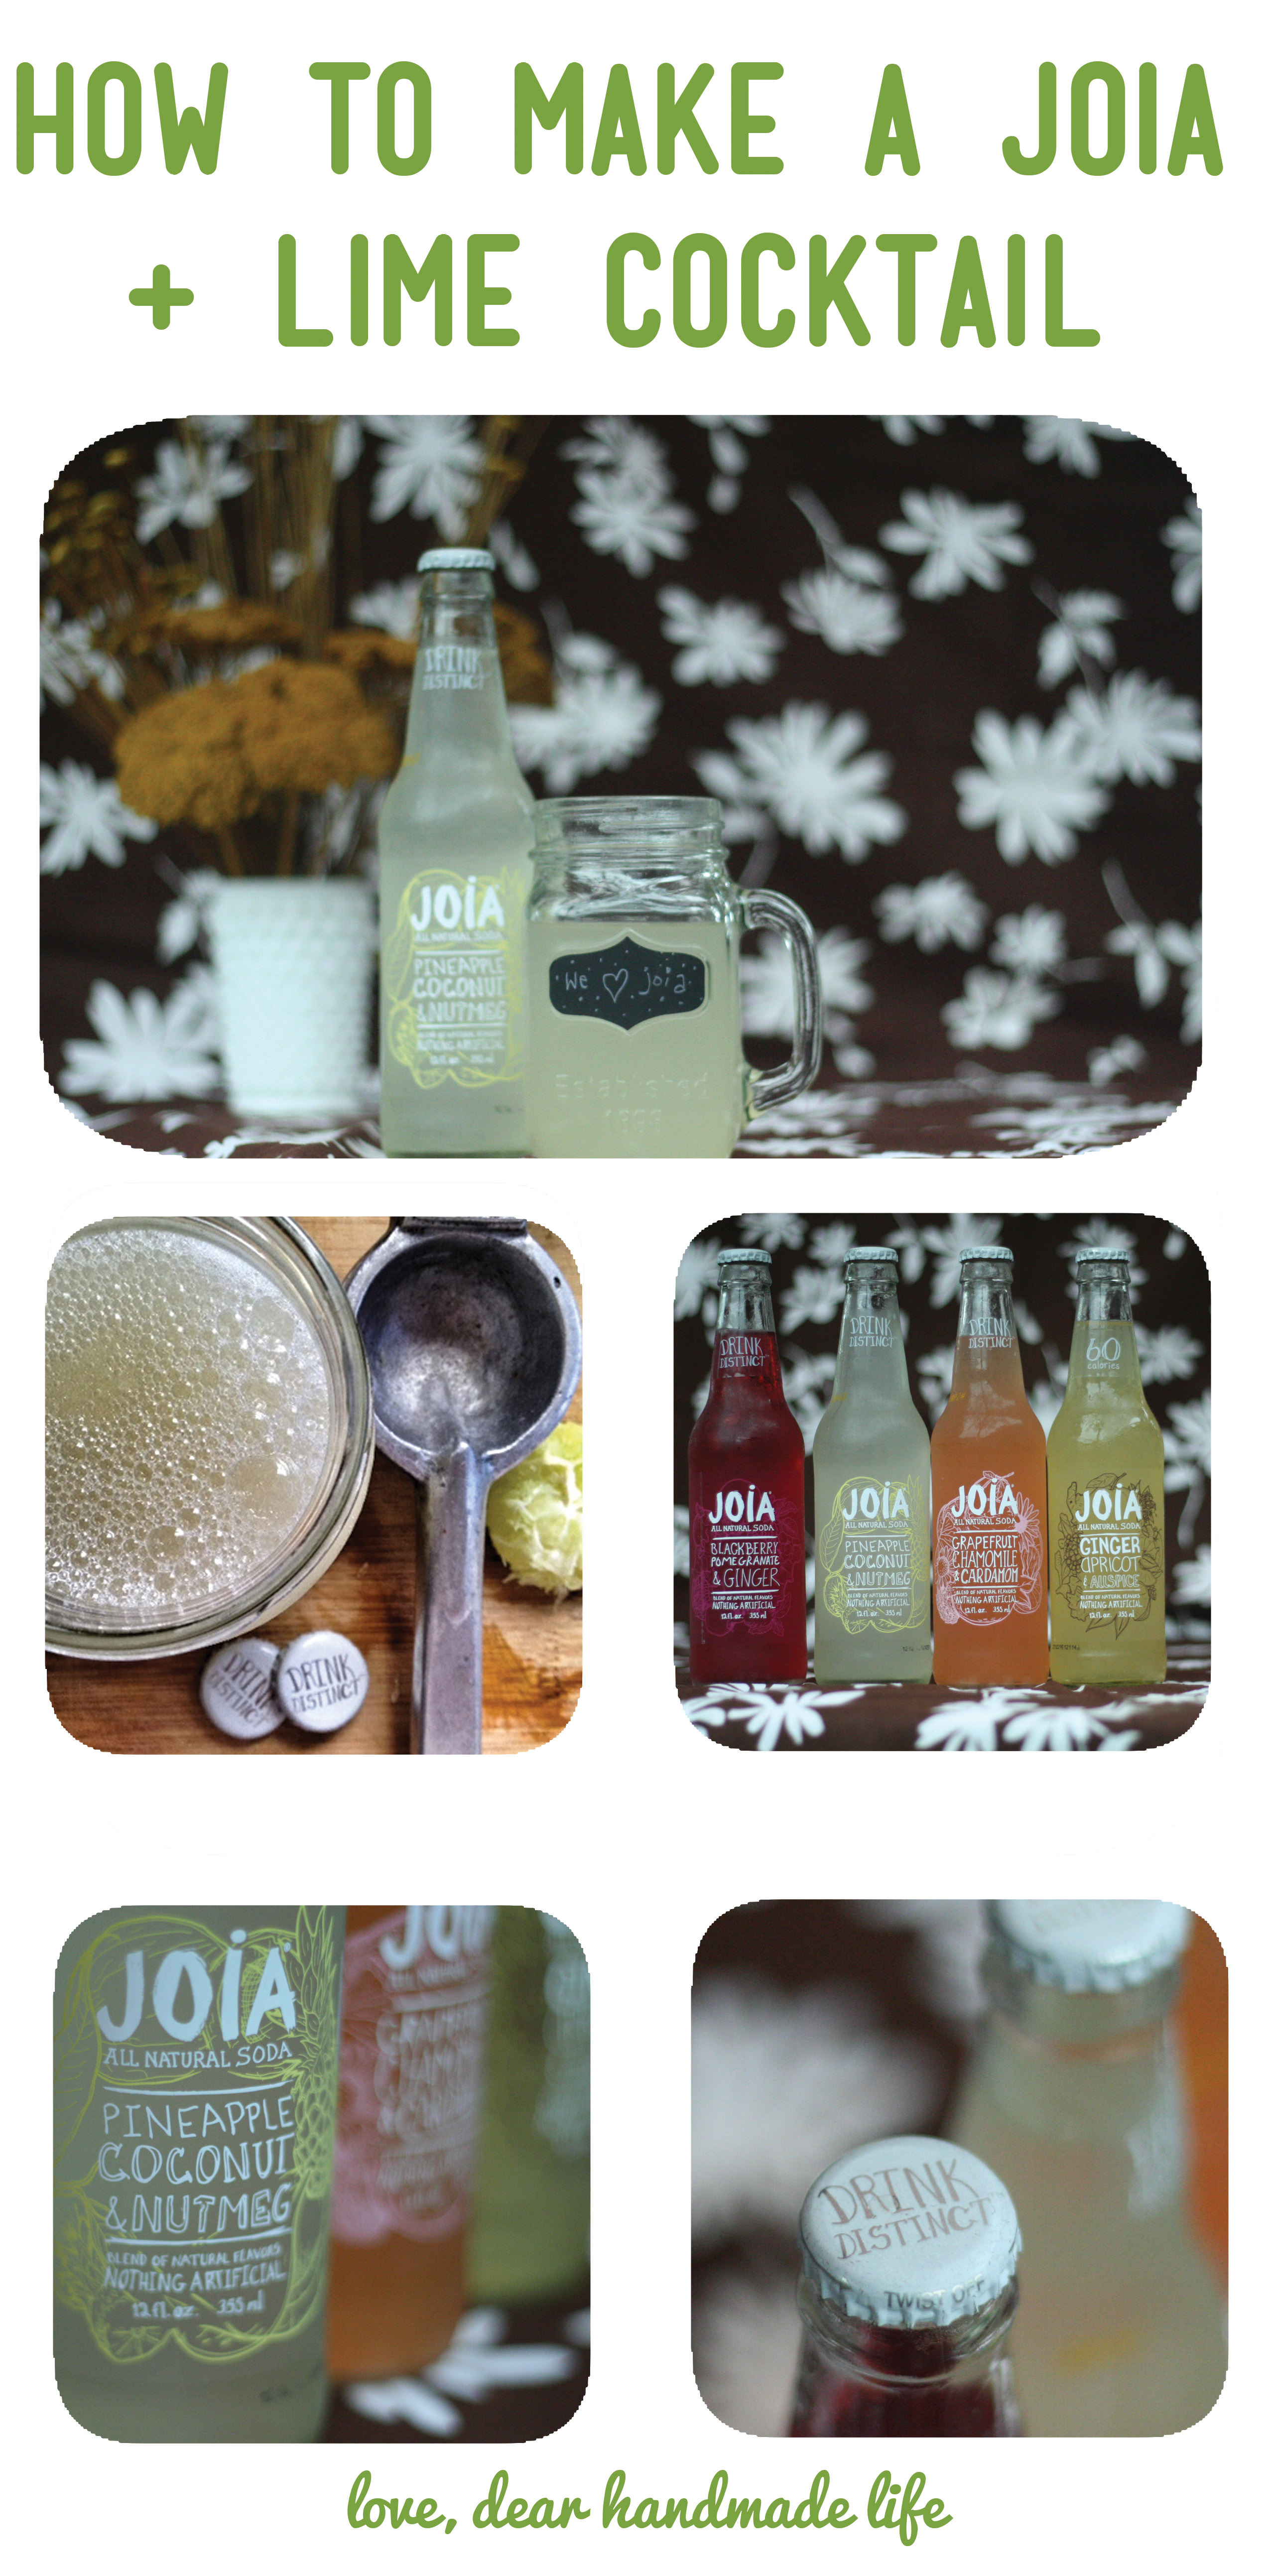 how-to-joia-lime-cocktail-drink-recipe-dear-handmade-life